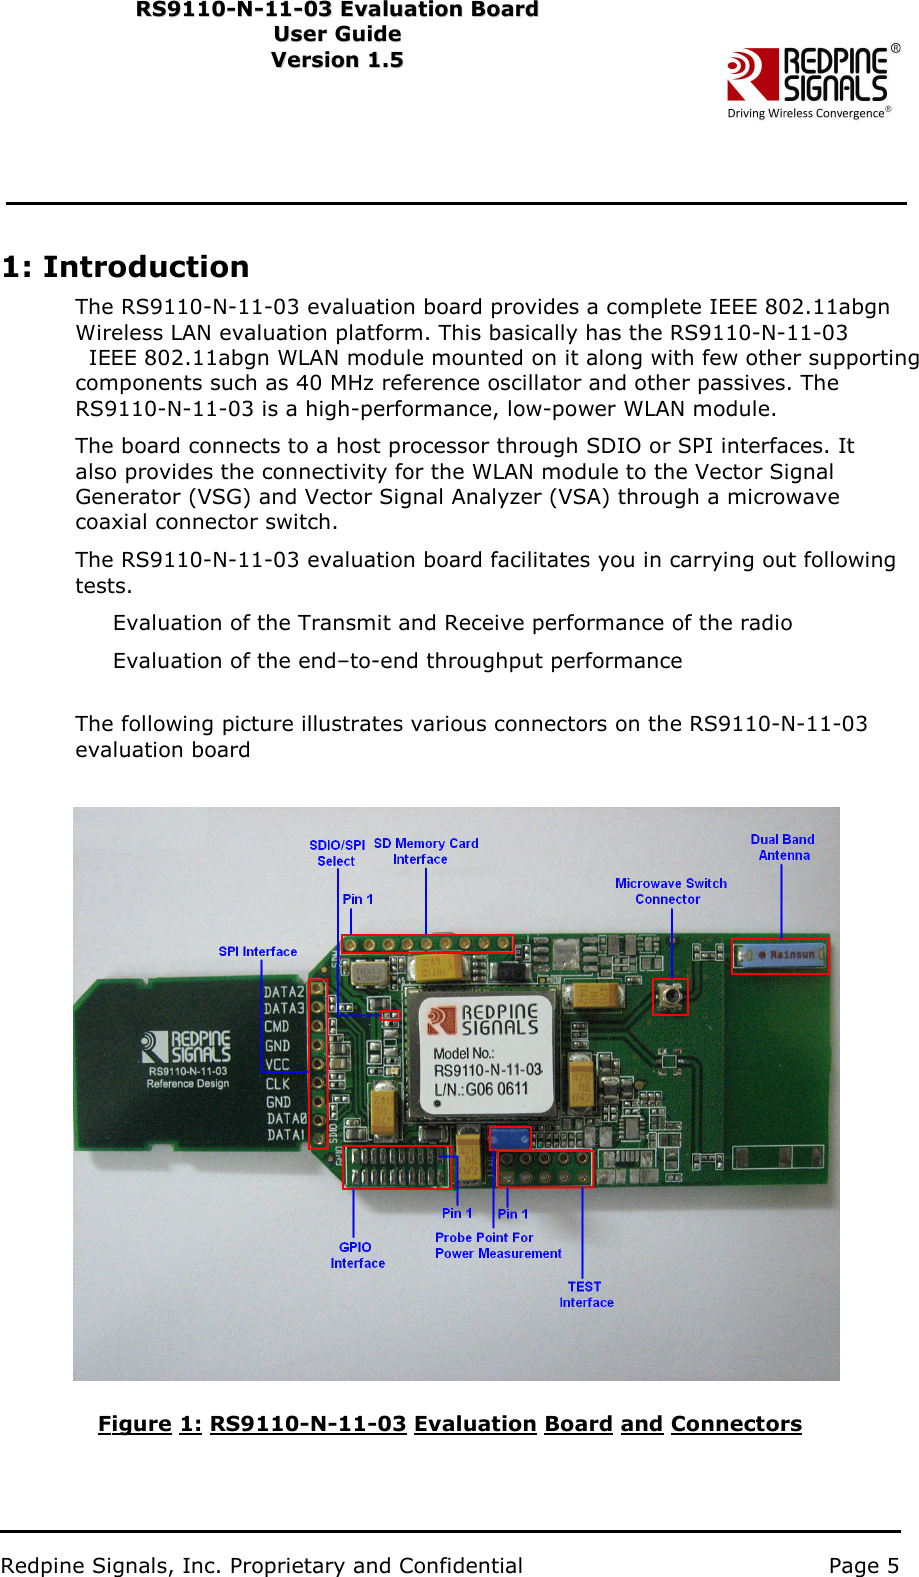                           Redpine Signals, Inc. Proprietary and Confidential   Page 5   RS9110-N-11-03 Evaluation Board RS91 1 0 -N-1 1 -0 3  Eval u ati on   B o ard User Guide Us e r Gu i d e  Version 1.5   Ver s i o n 1.5   1: Introduction The RS9110-N-11-03 evaluation board provides a complete IEEE 802.11abgn W ireless LAN evaluation platform. This basically has the RS9110-N-11-03 IEEE 802.11abgn WLAN module mounted on it along with few other supporting components such as 40 MHz reference oscillator and other passives. The RS9110-N-11-03 is a high-performance, low-power WLAN module.   The board connects to a host processor through SDIO or SPI interfaces. It also provides the connectivity for the WLAN module to the Vector Signal Generator (VSG) and Vector Signal Analyzer (VSA) through a microwave coaxial connector switch. The RS9110-N-11-03 evaluation board facilitates you in carrying out following tests.   Evaluation of the Transmit and Receive performance of the radio Evaluation of the end–to-end throughput performance   The following picture illustrates various connectors on the RS9110-N-11-03 evaluation board                   Figure 1: RS9110-N-11-03 Evaluation Board and Connectors 